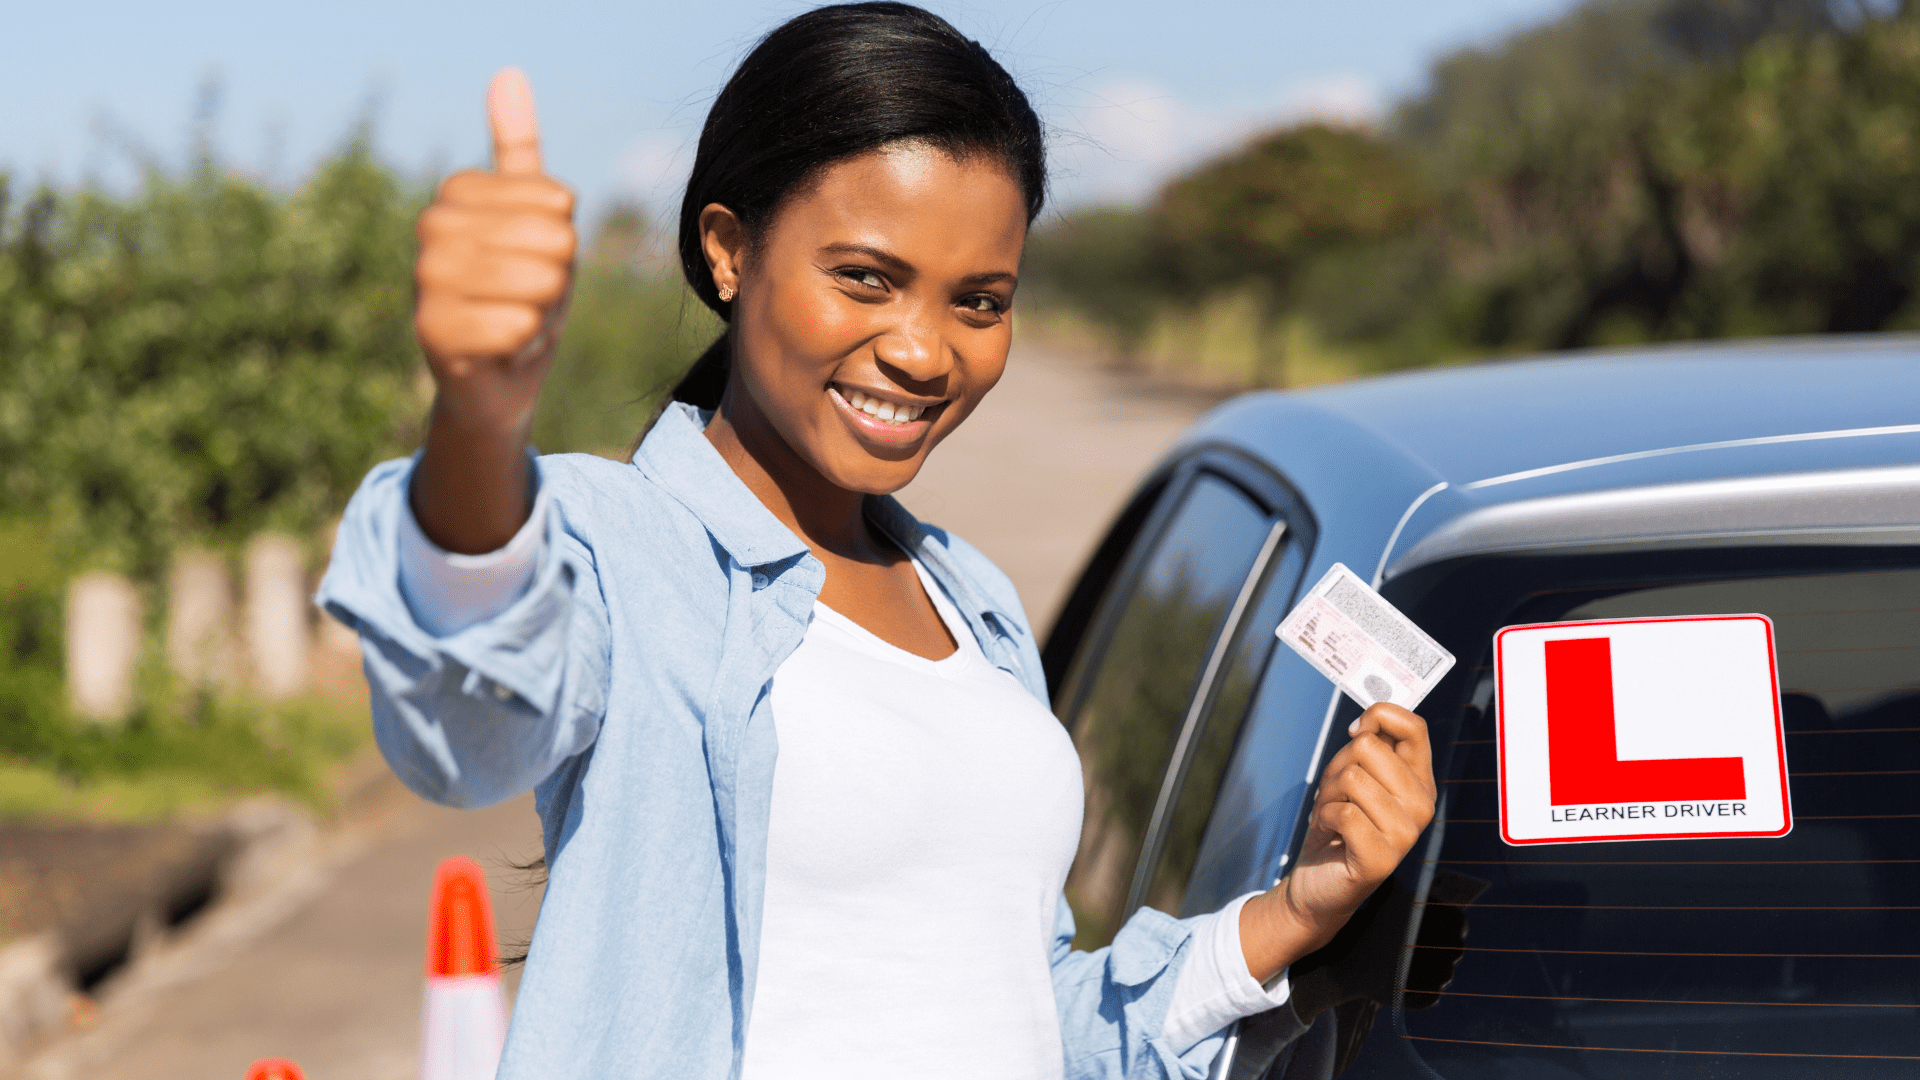 African learner driver holding her driver's license